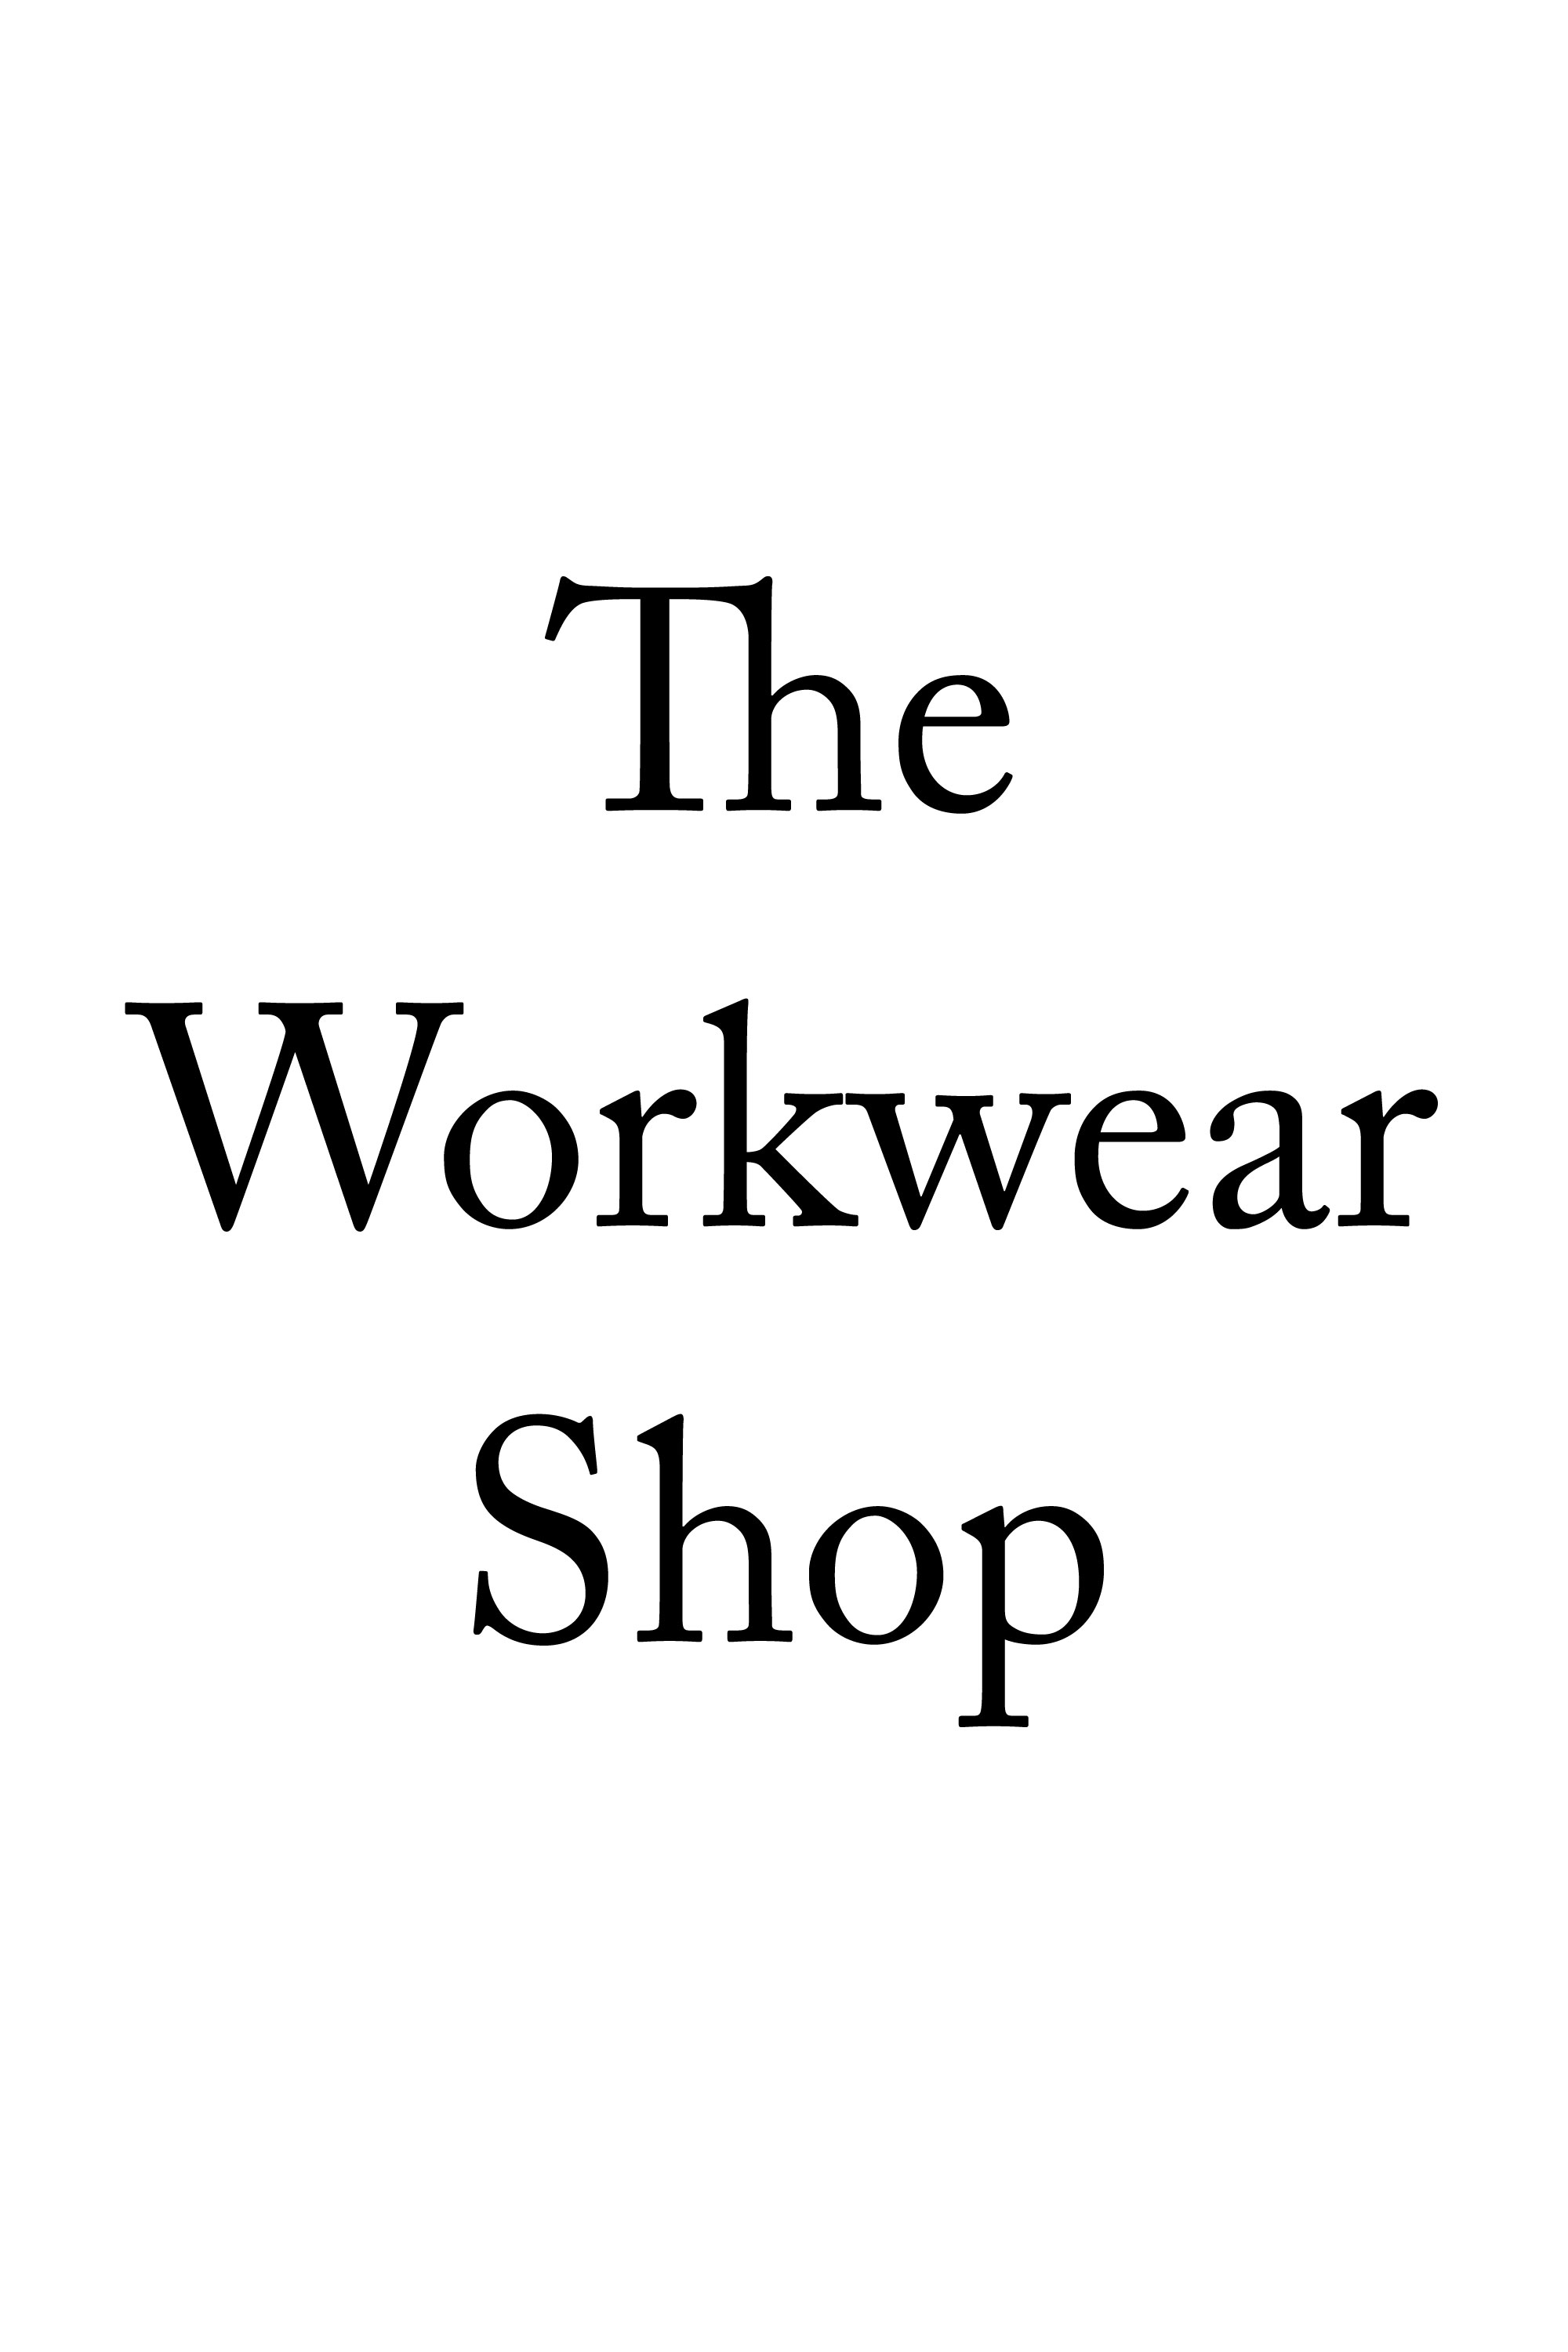 Your Workwear Resource